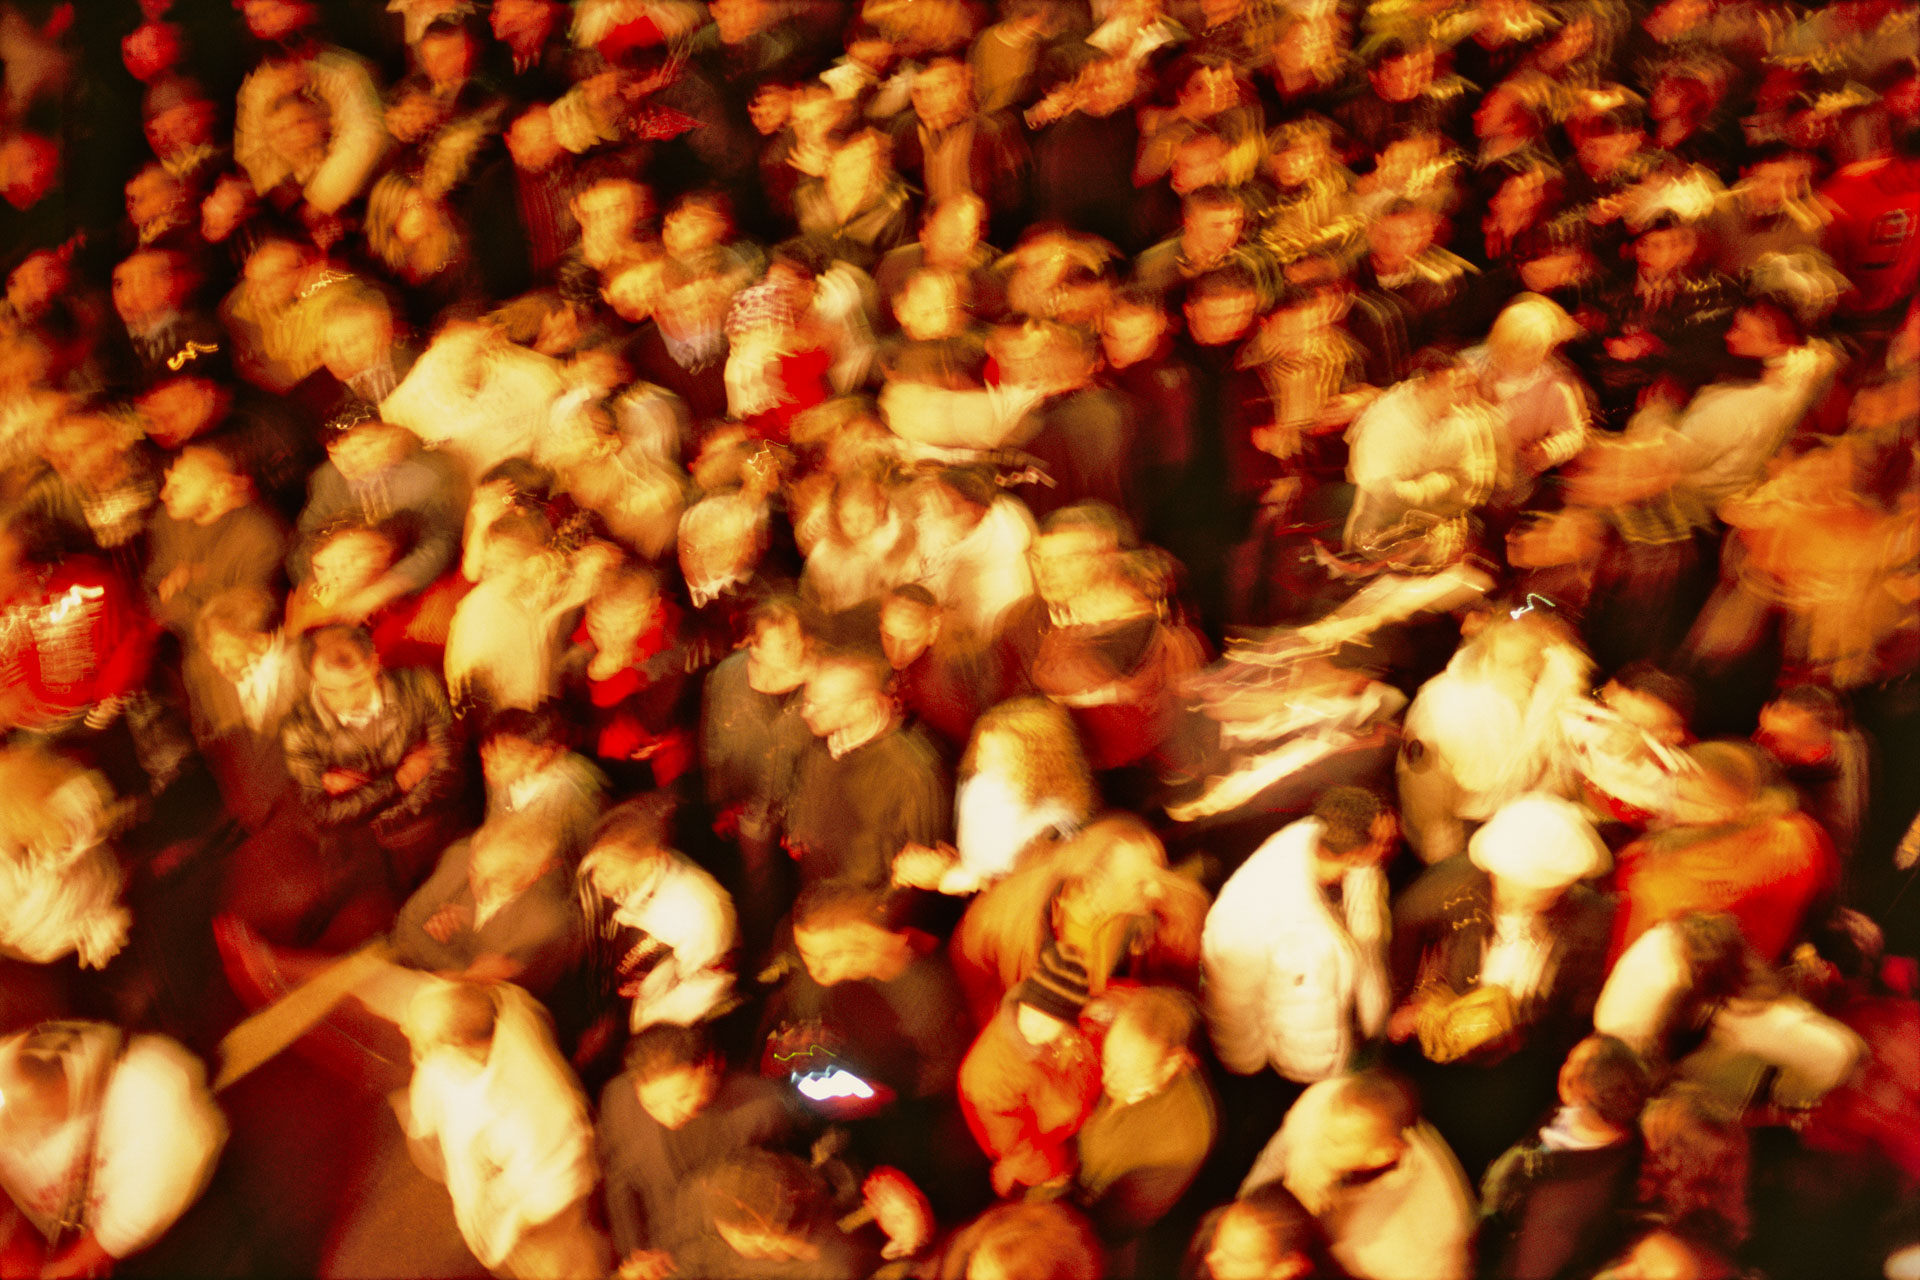 The crowd, Paternò, 2004. Courtesy of the artist and Marian Goodman Gallery. © Nan Goldin